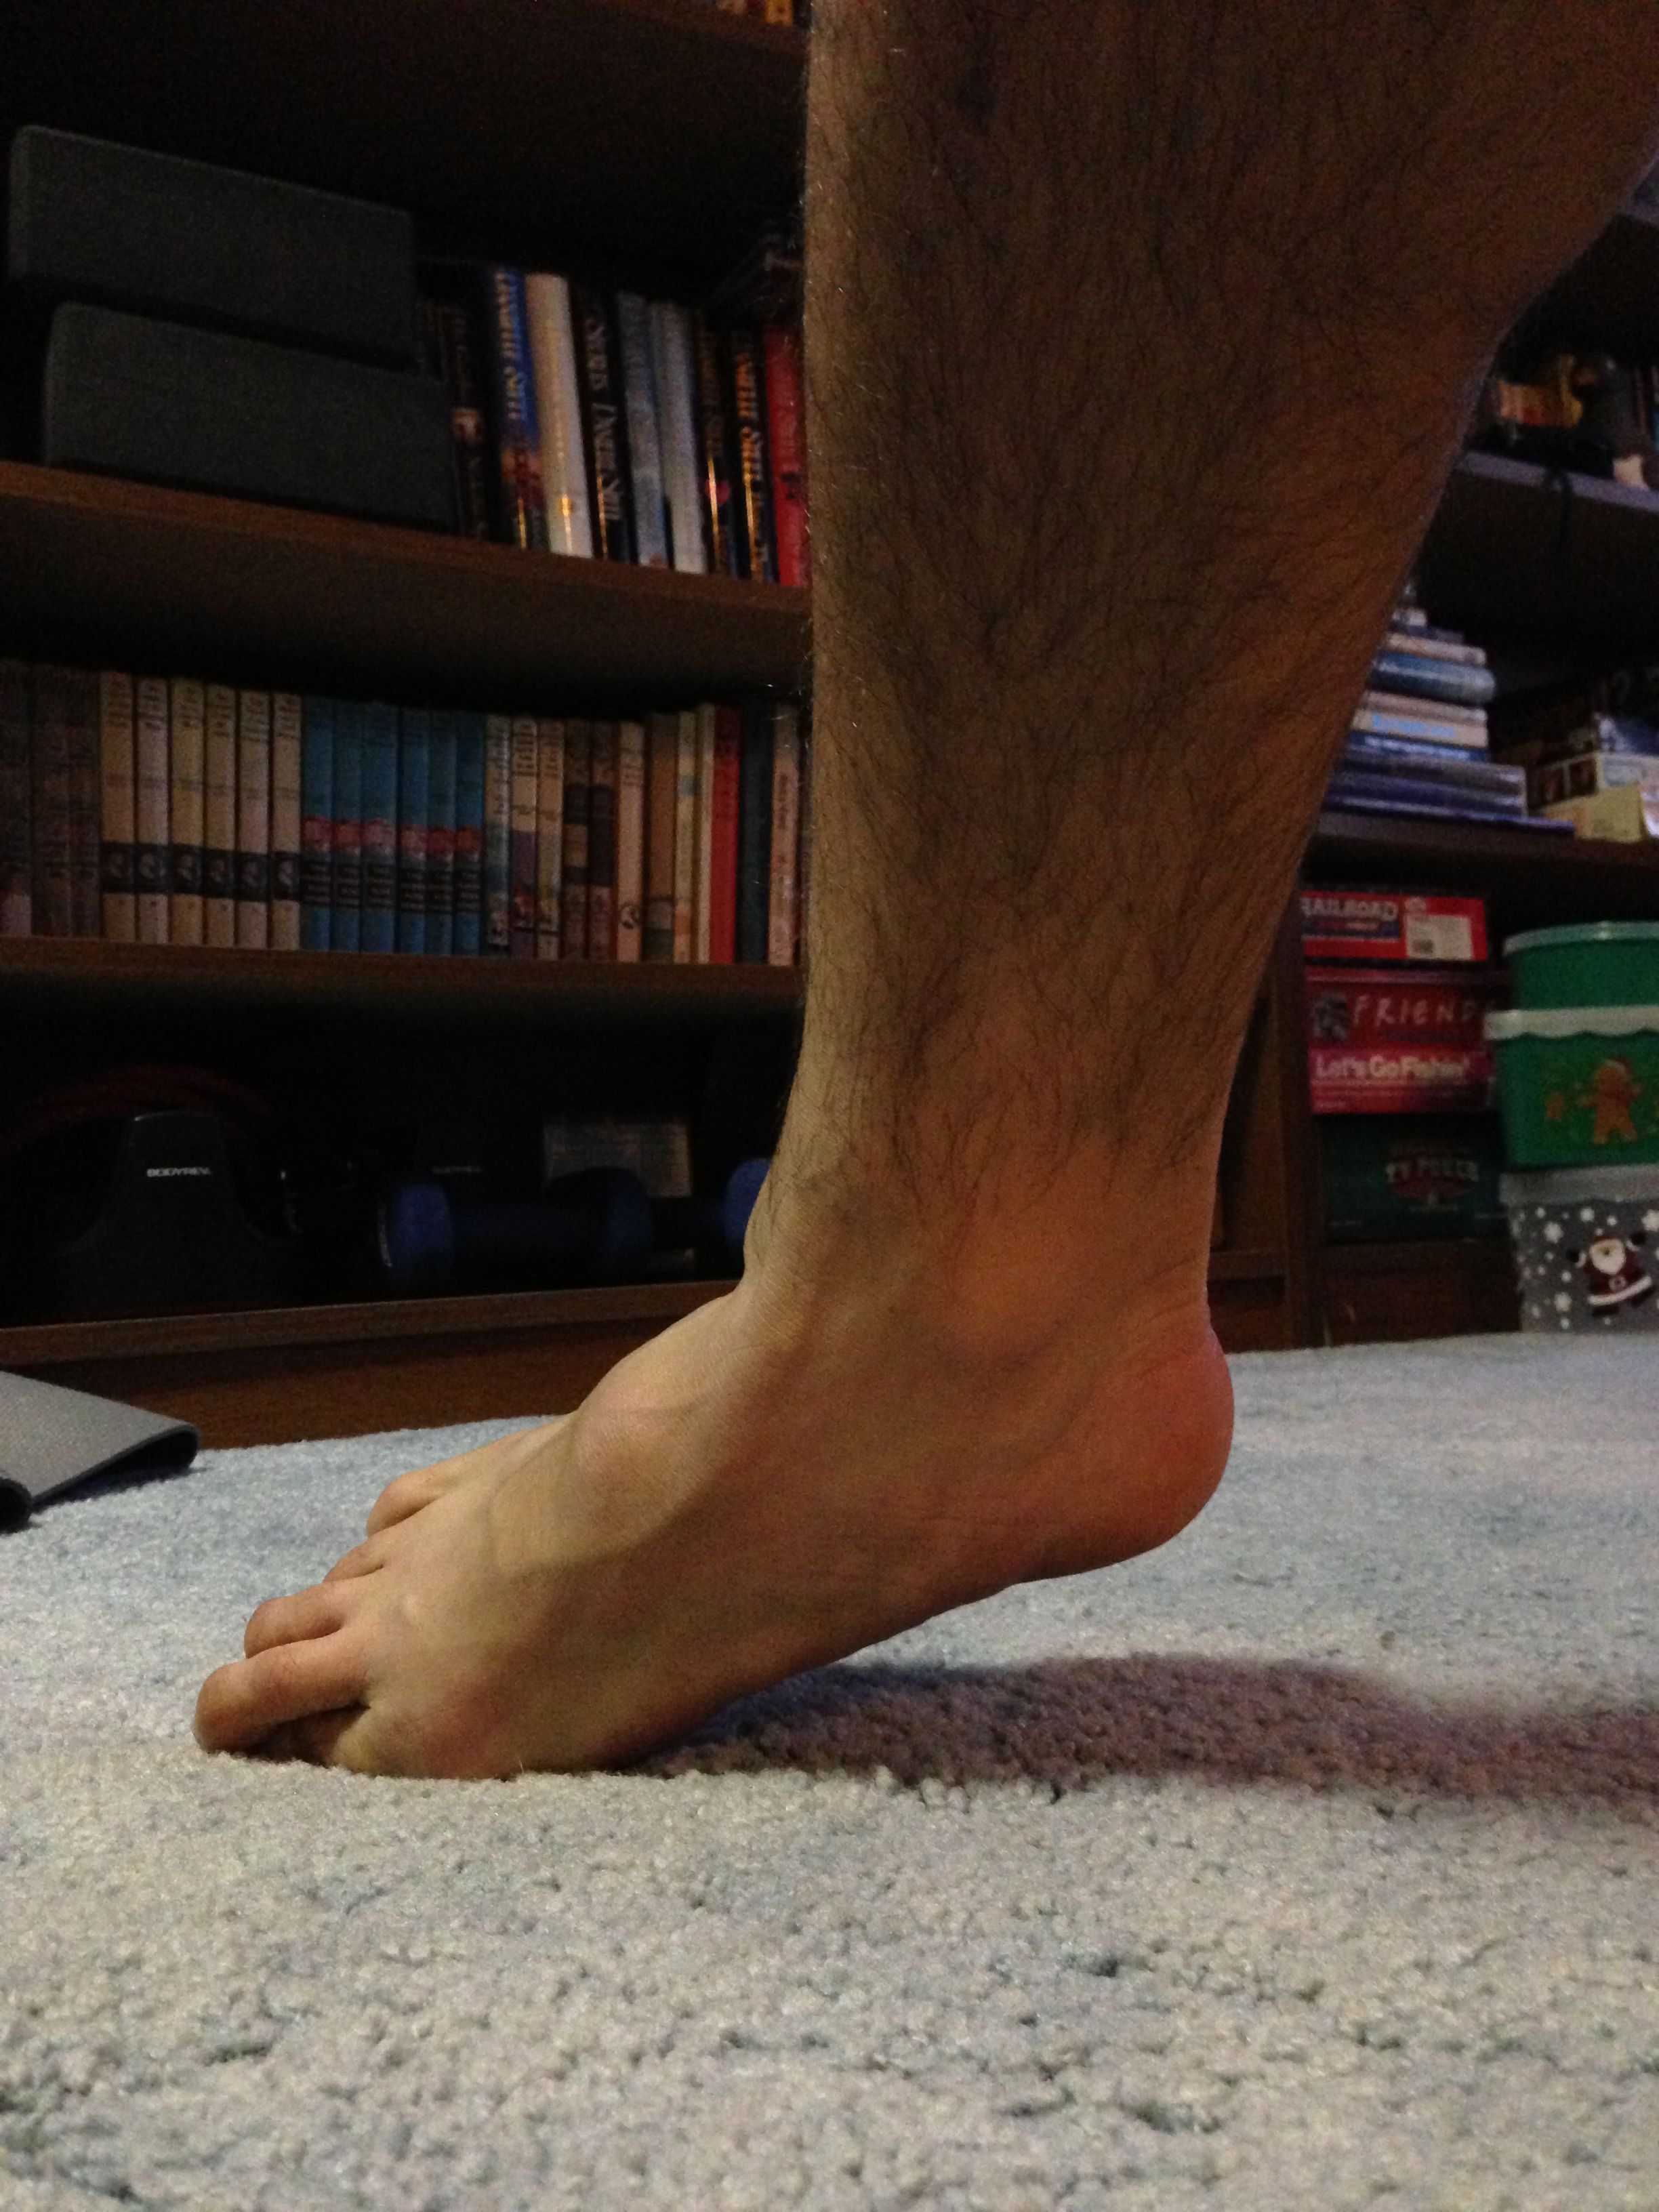 https://upload.wikimedia.org/wikipedia/commons/thumb/c/ca/Ankle_Eversion.JPG/2448px-Ankle_Eversion.JPG